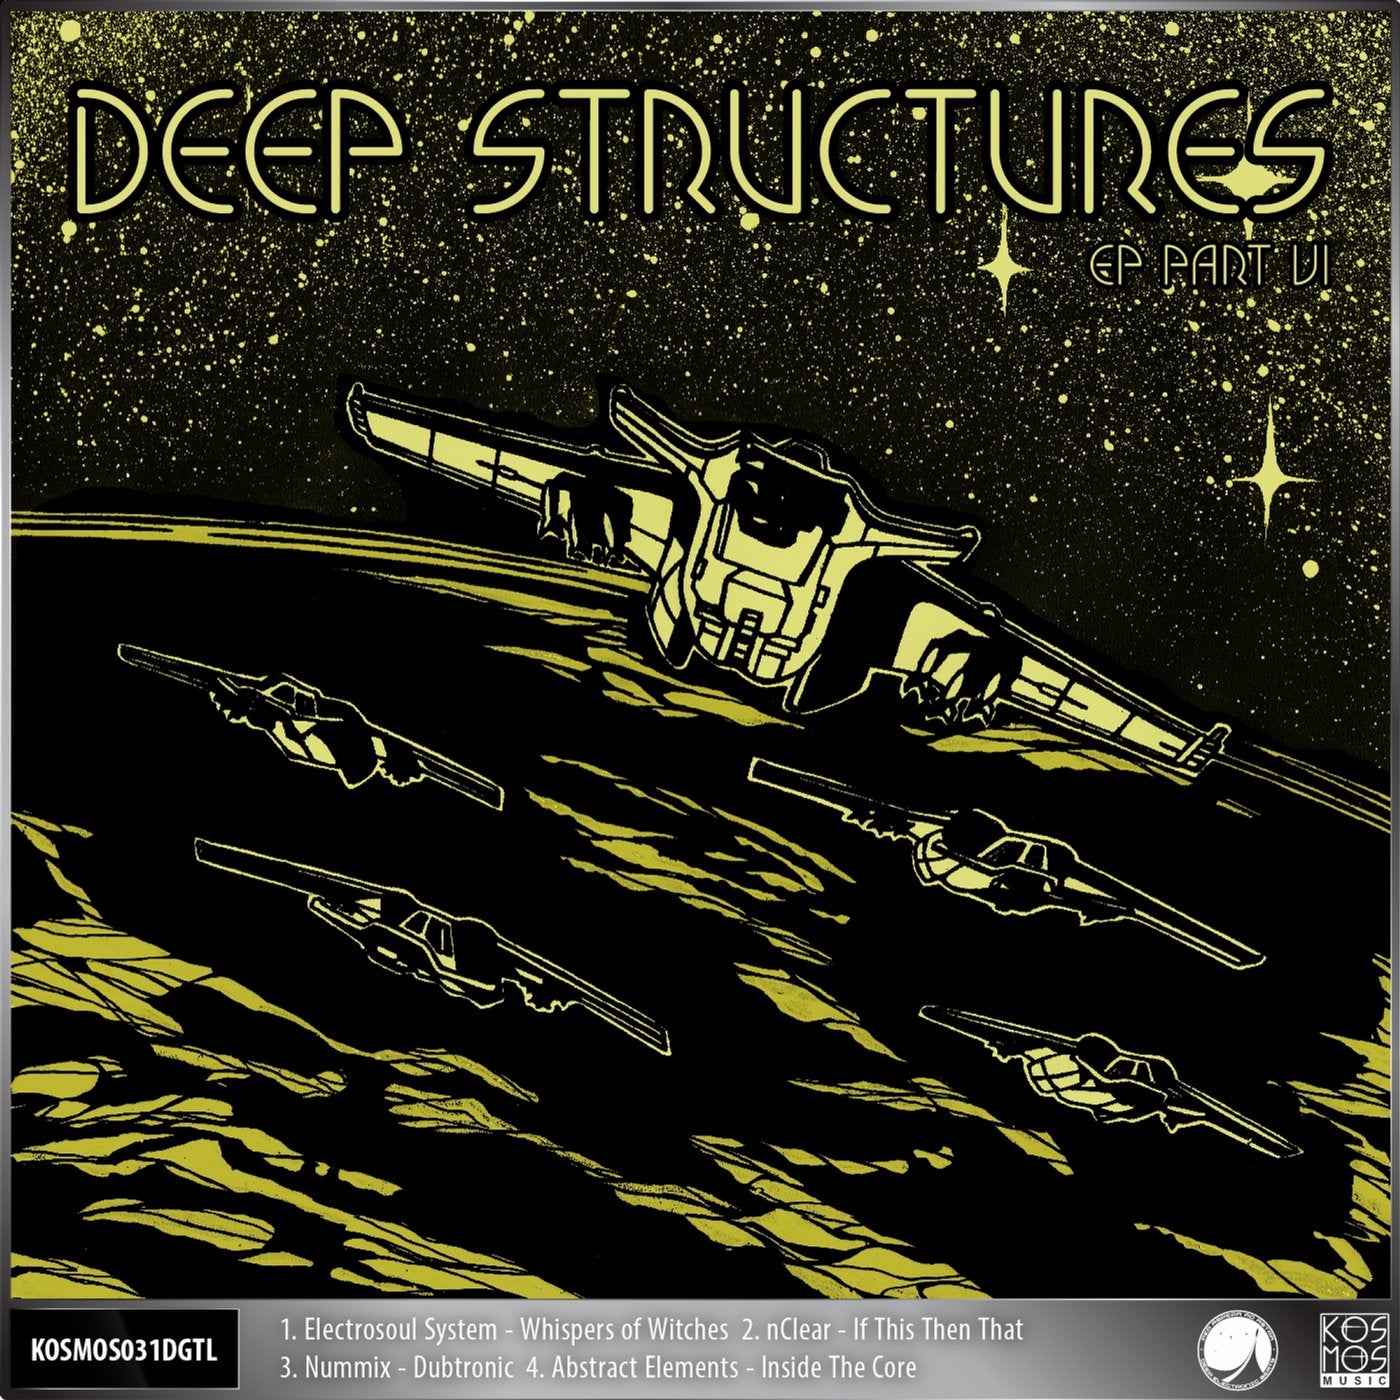 V/A Deep Structures EP Part 6